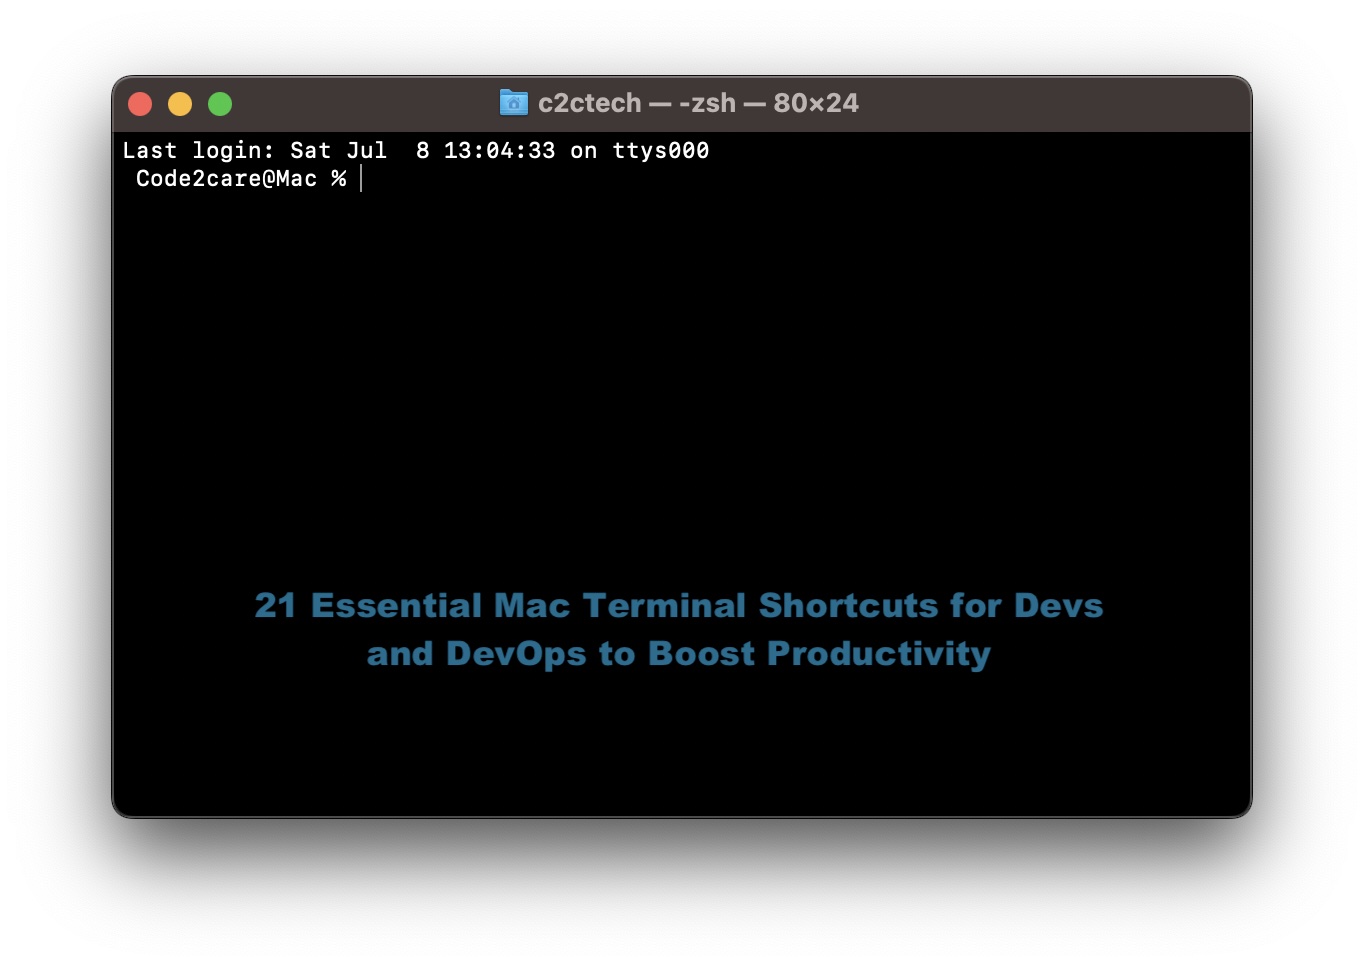 Essential Mac Terminal Shortcuts for Devs and DevOps to Boost Productivity